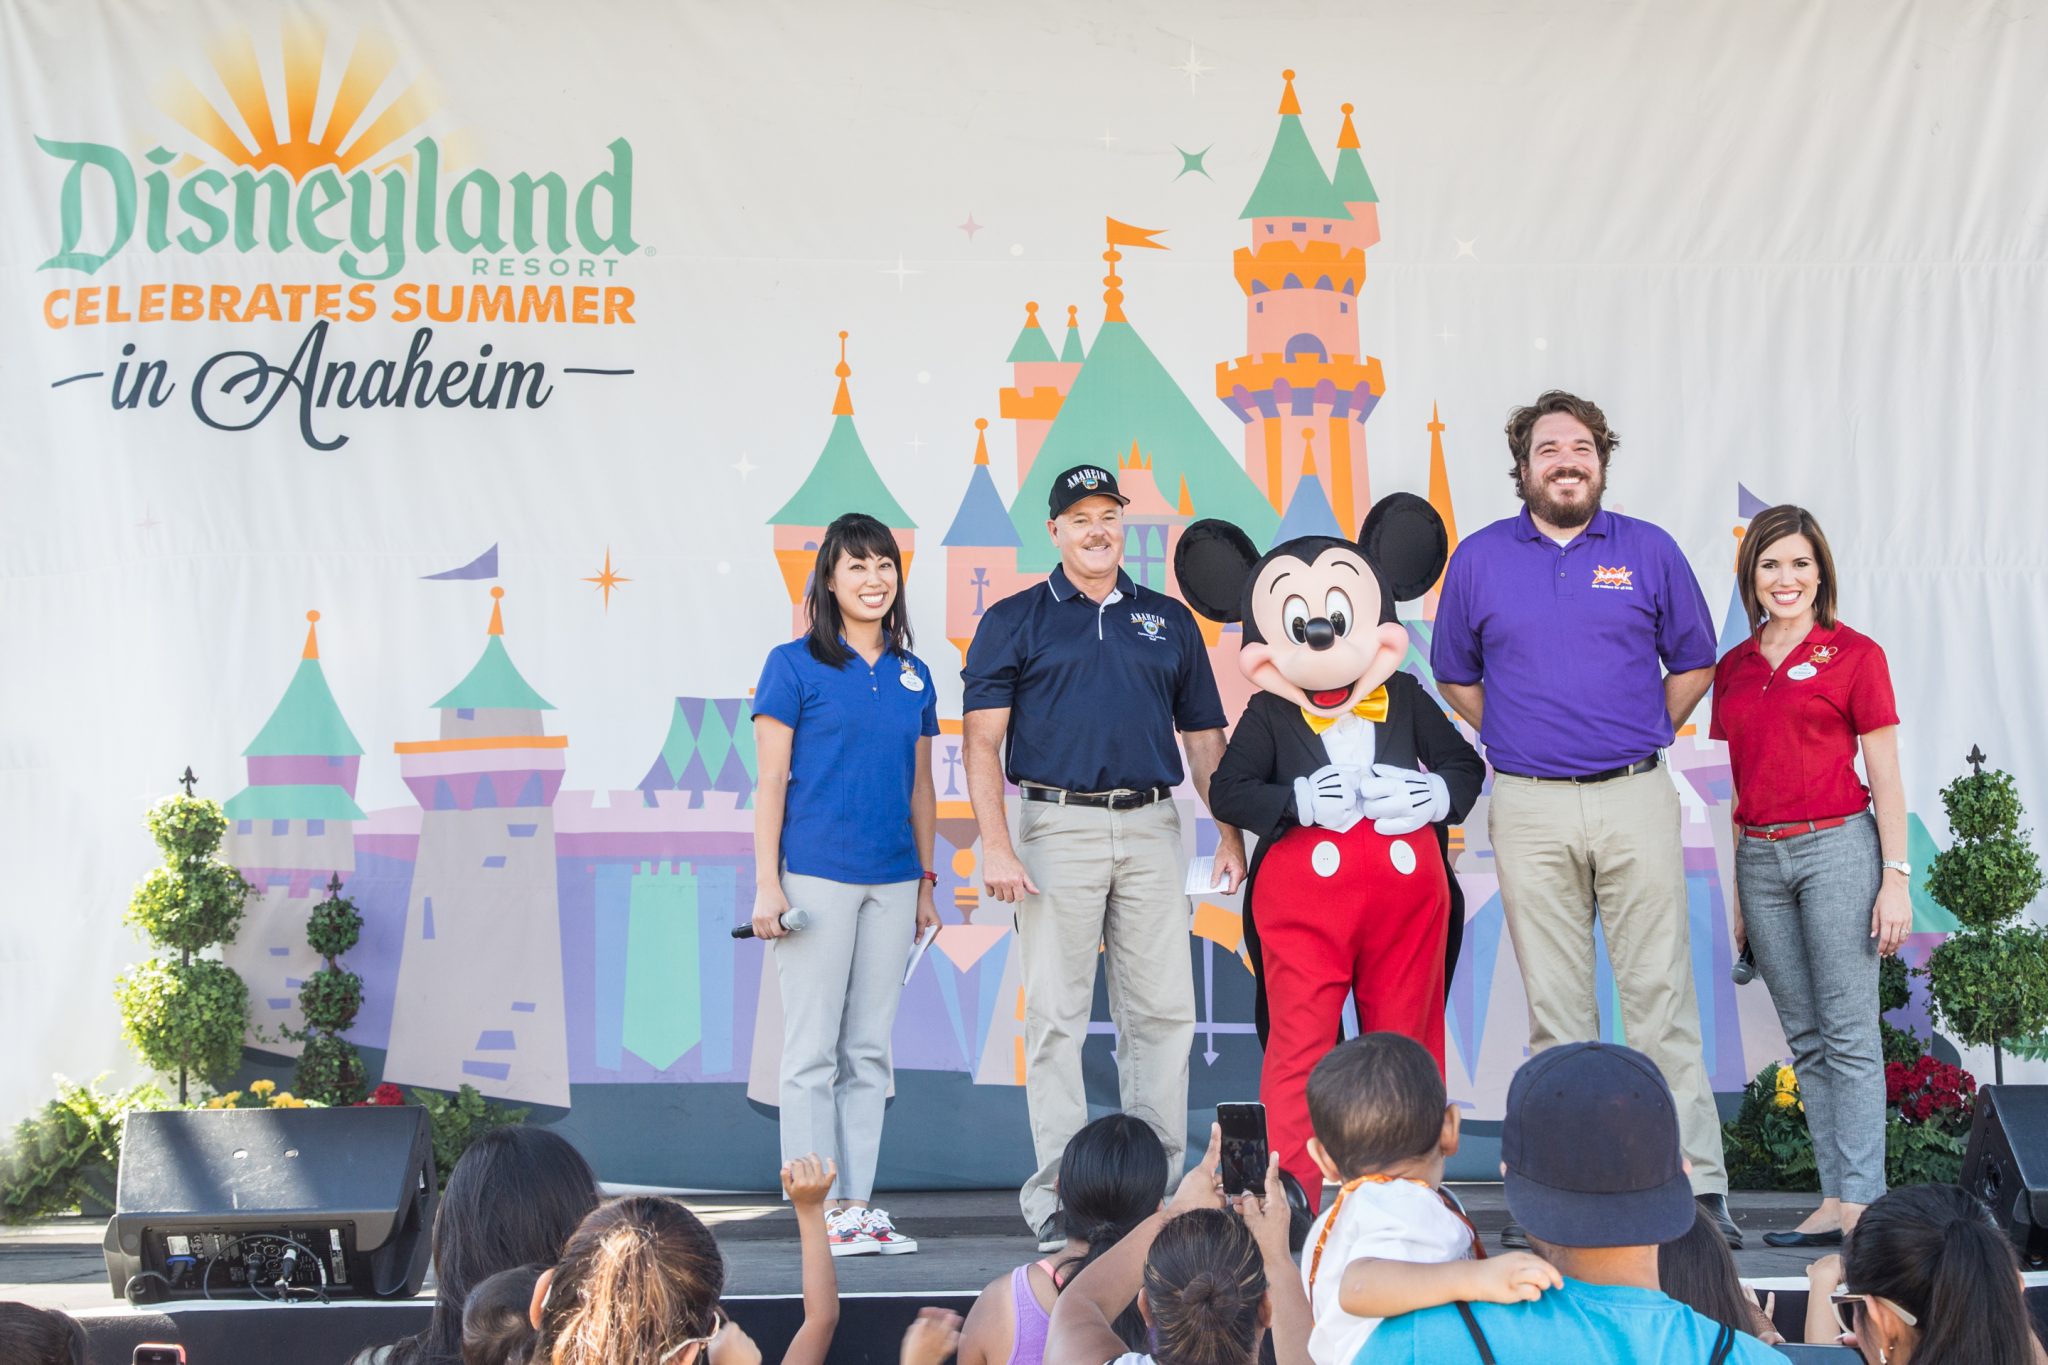 KaBOOM! Teams up with the Disneyland Resort & More to Build Five New Playgrounds in Anaheim